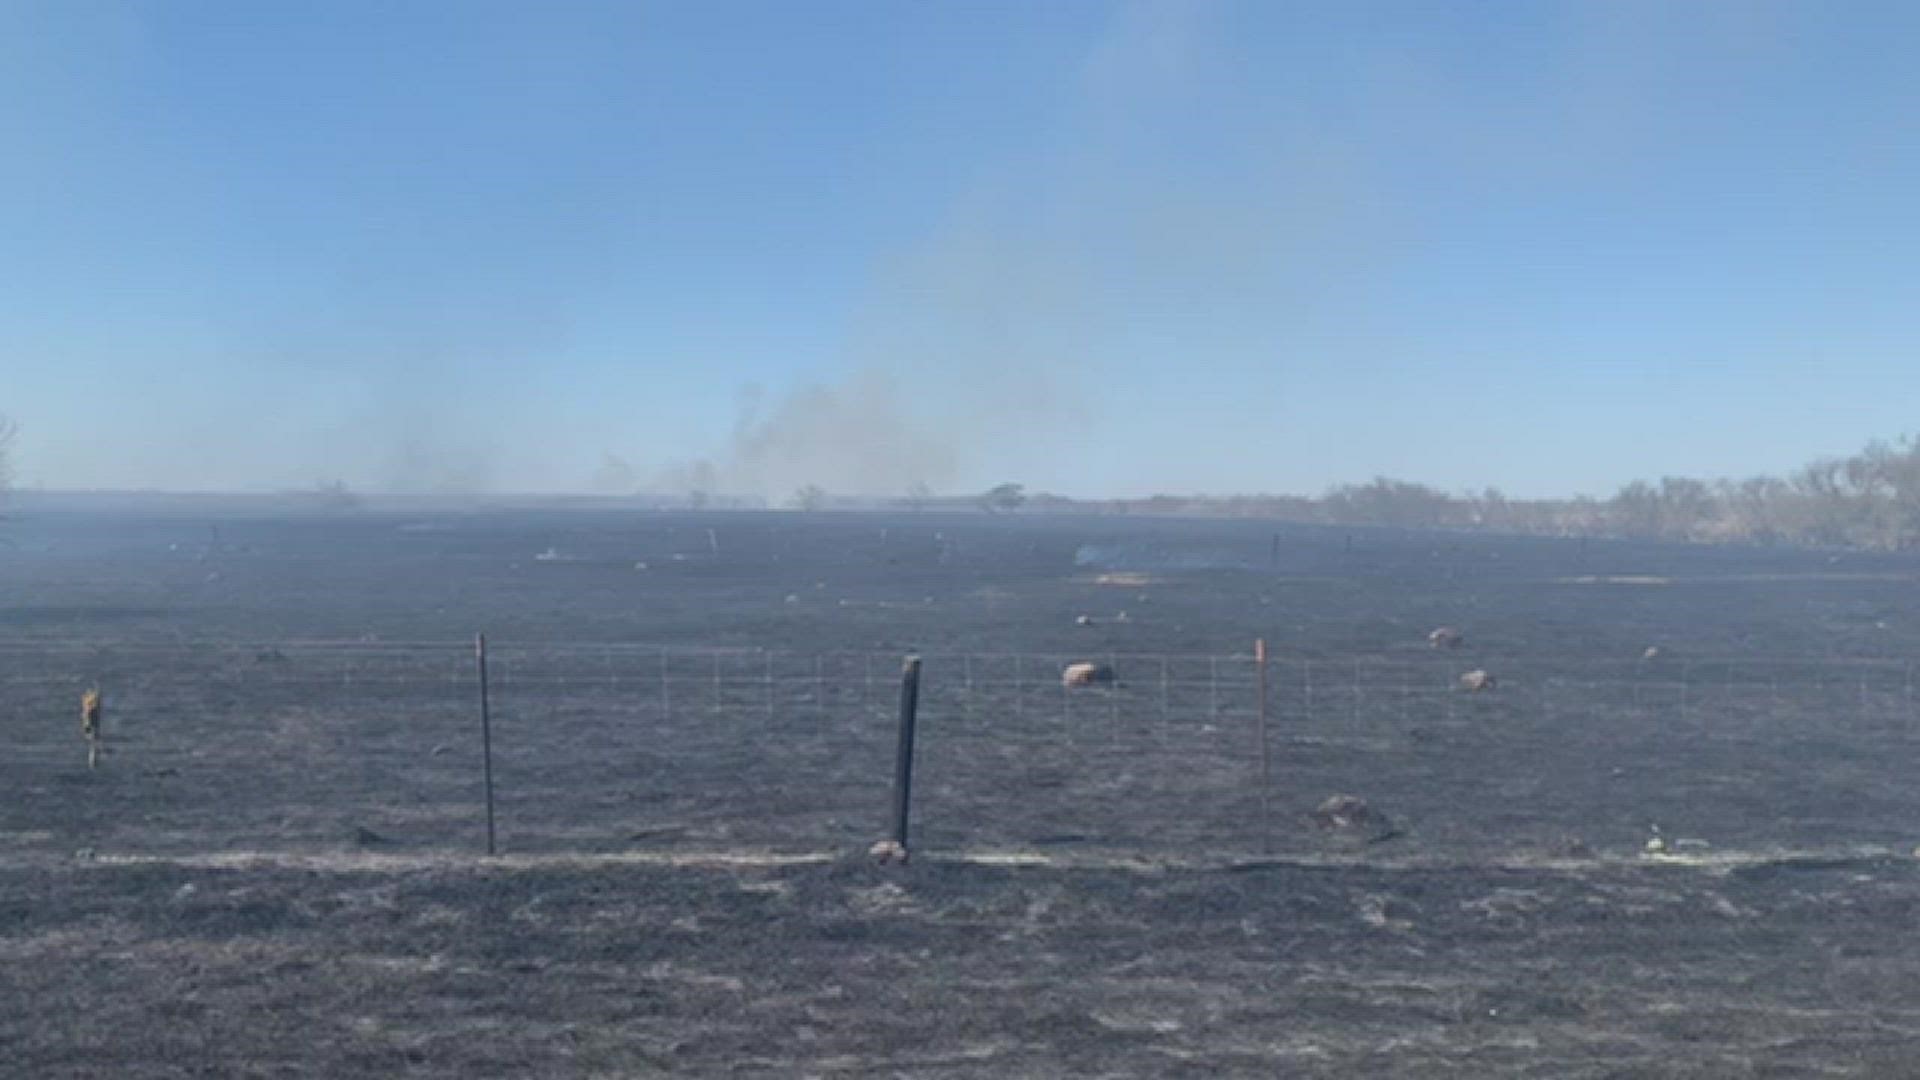 Firefighters in Sinton are battling a major grass fire off Highway 77 and Farm-to-Market 1945.